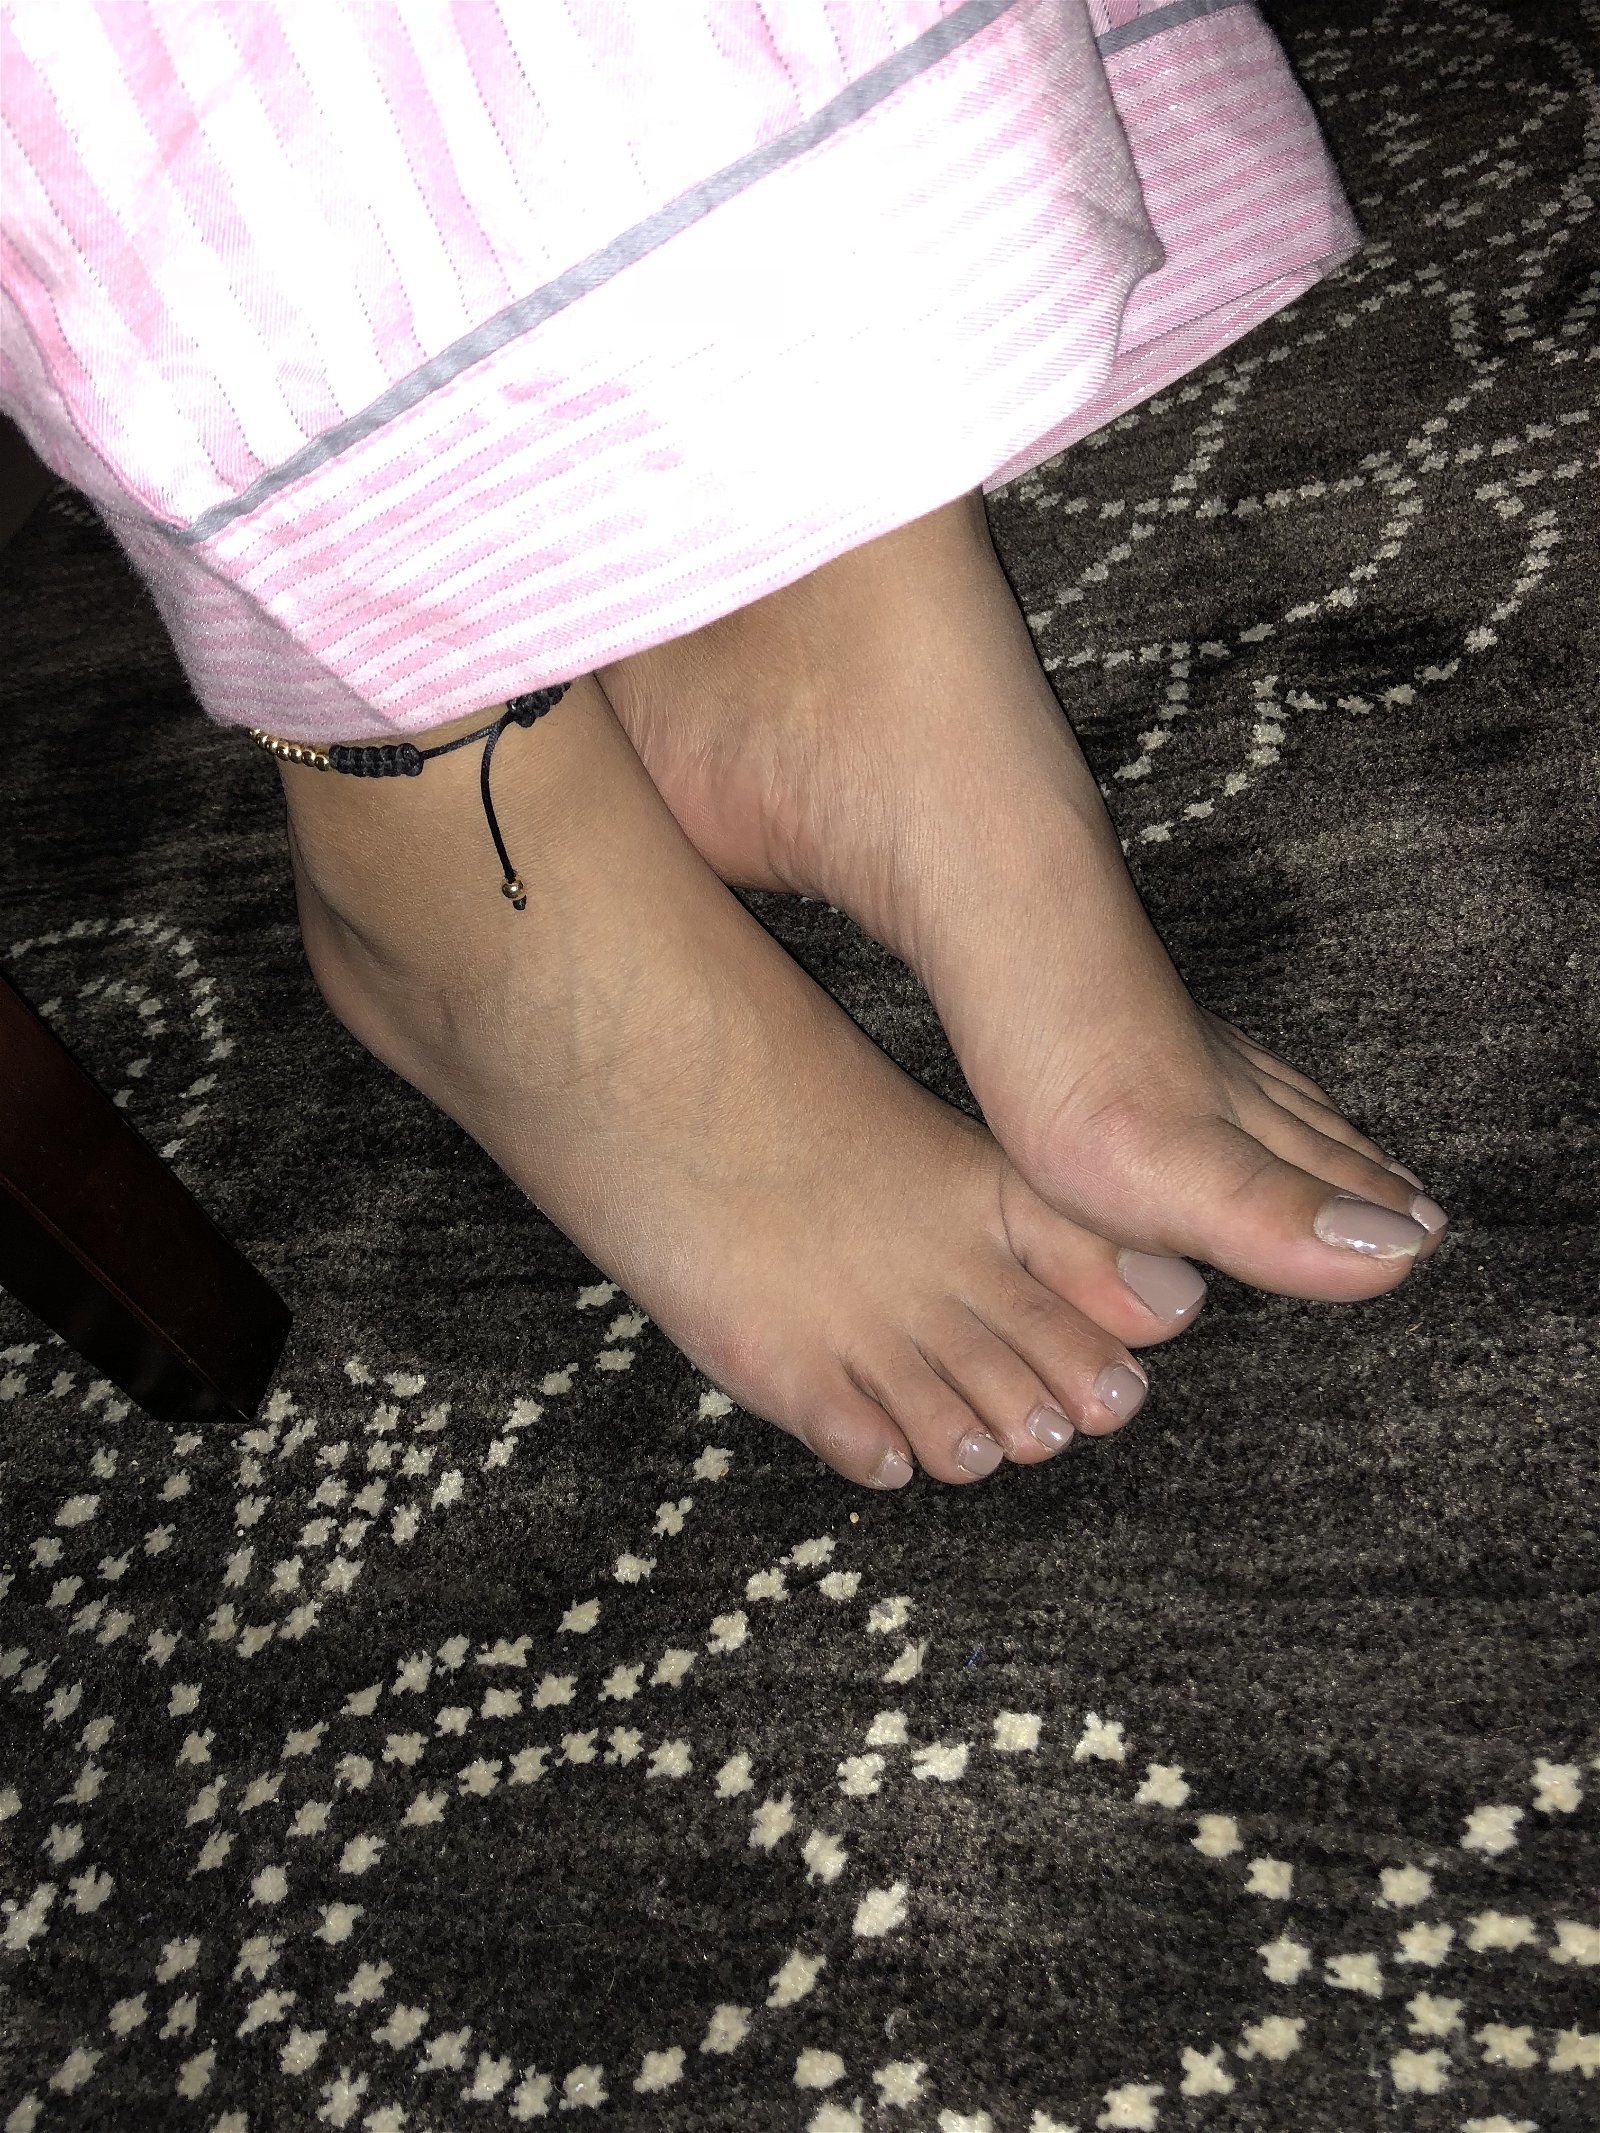 Photo by Nilegoddess with the username @Nilegoddess, who is a star user,  November 29, 2017 at 7:44 AM and the text says 'Studying. :( #Feet  #toes  #teen  #sexy  #pajamas  #studying  #fetish  #young  #feet  #girl  #foot'